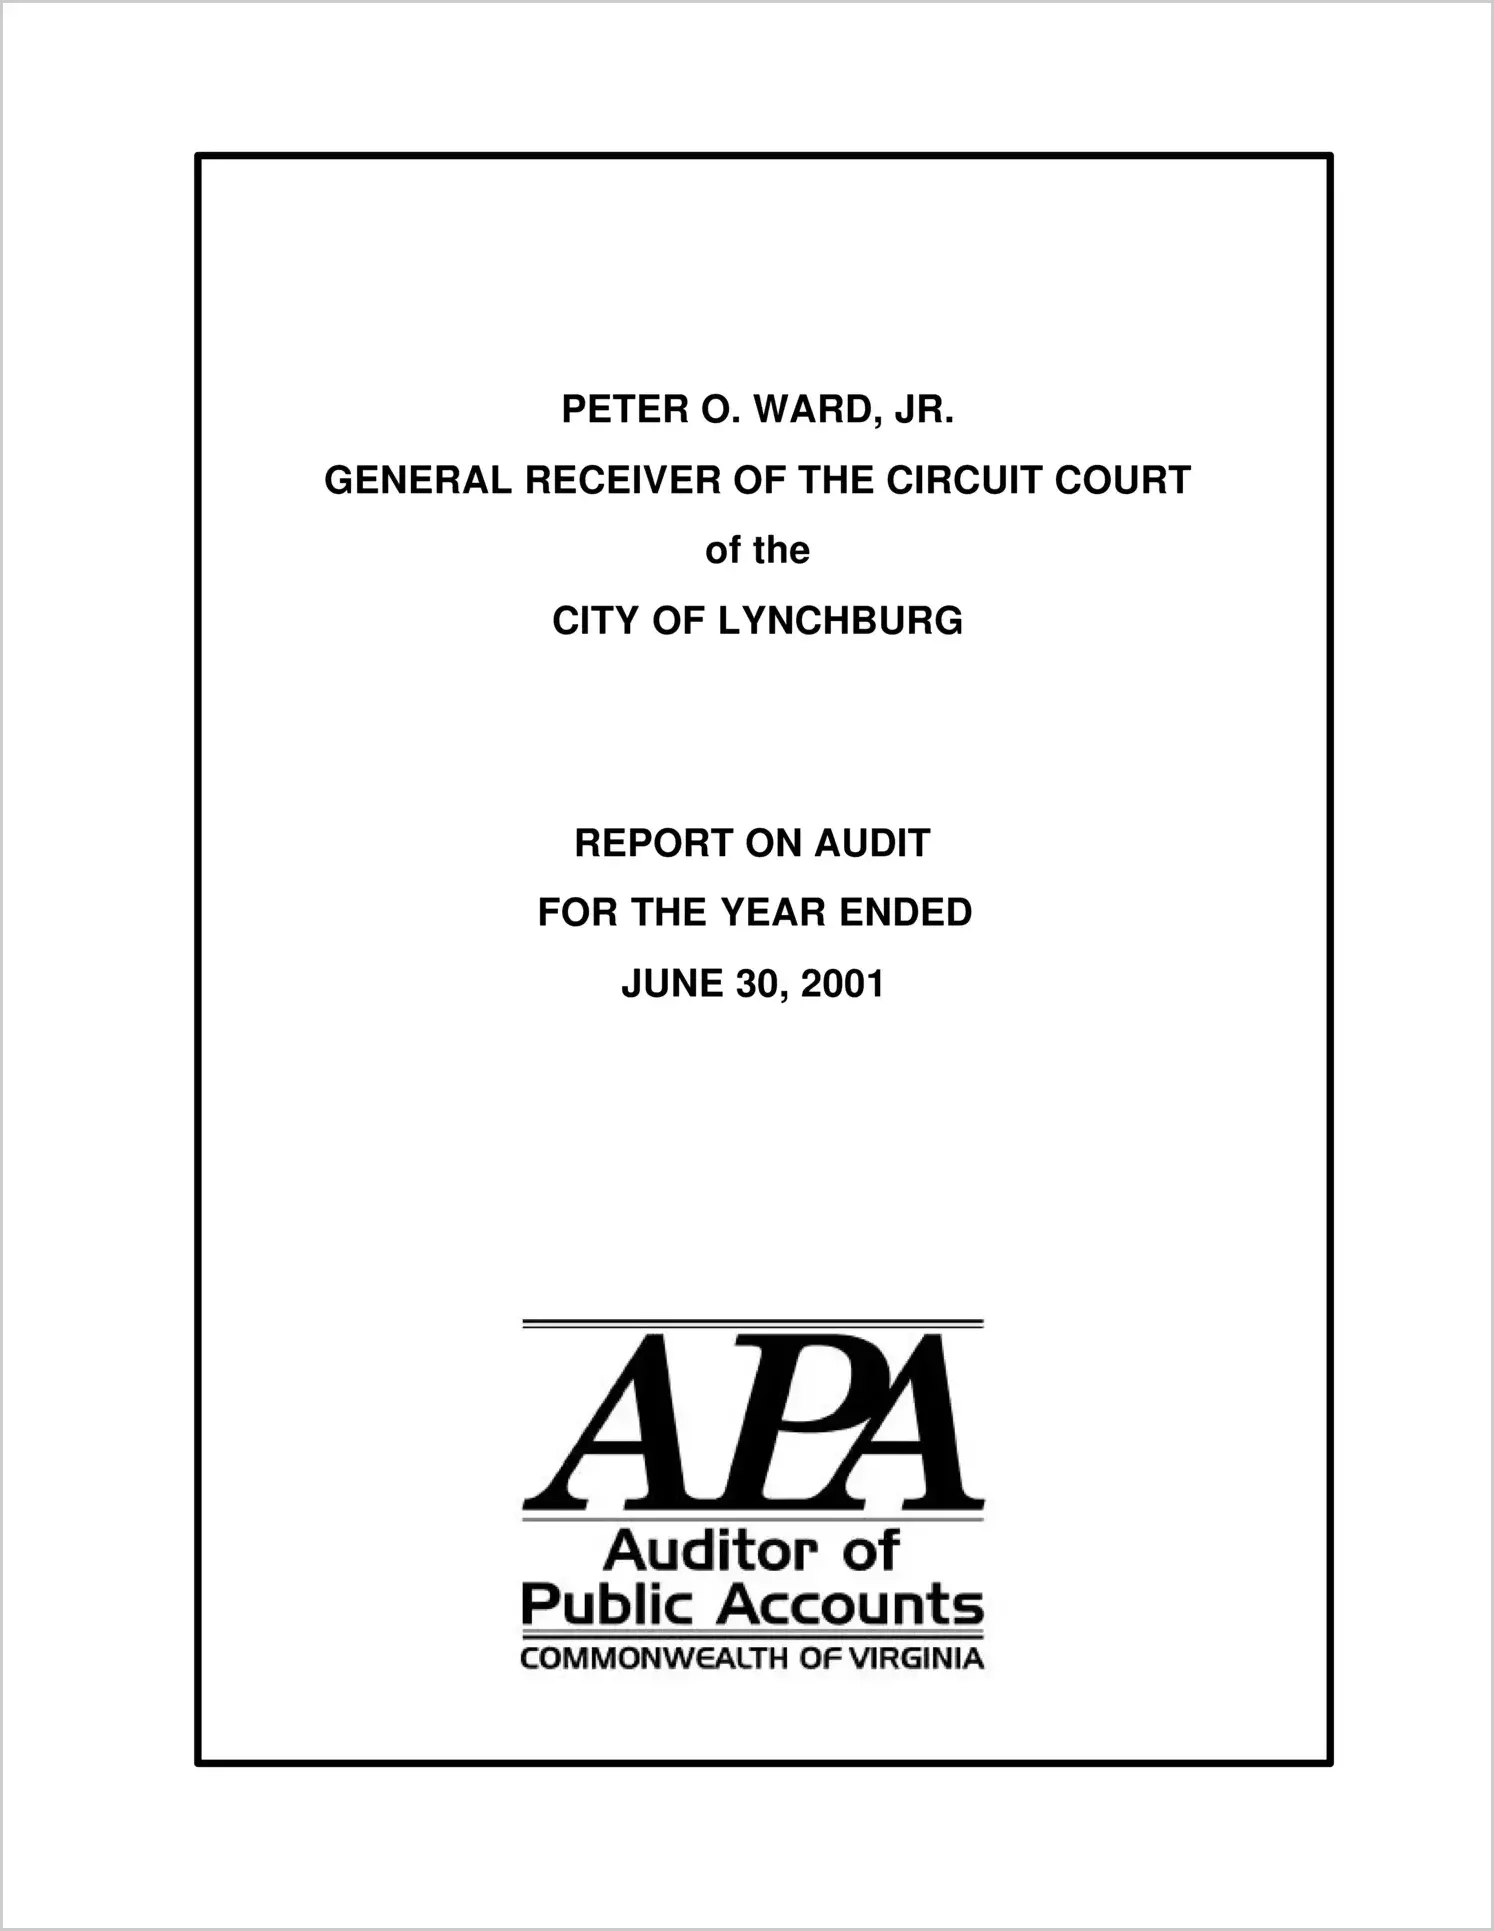 General Receiver of the Circuit Court of the City of Lynchburg for the year ended June 30, 2001